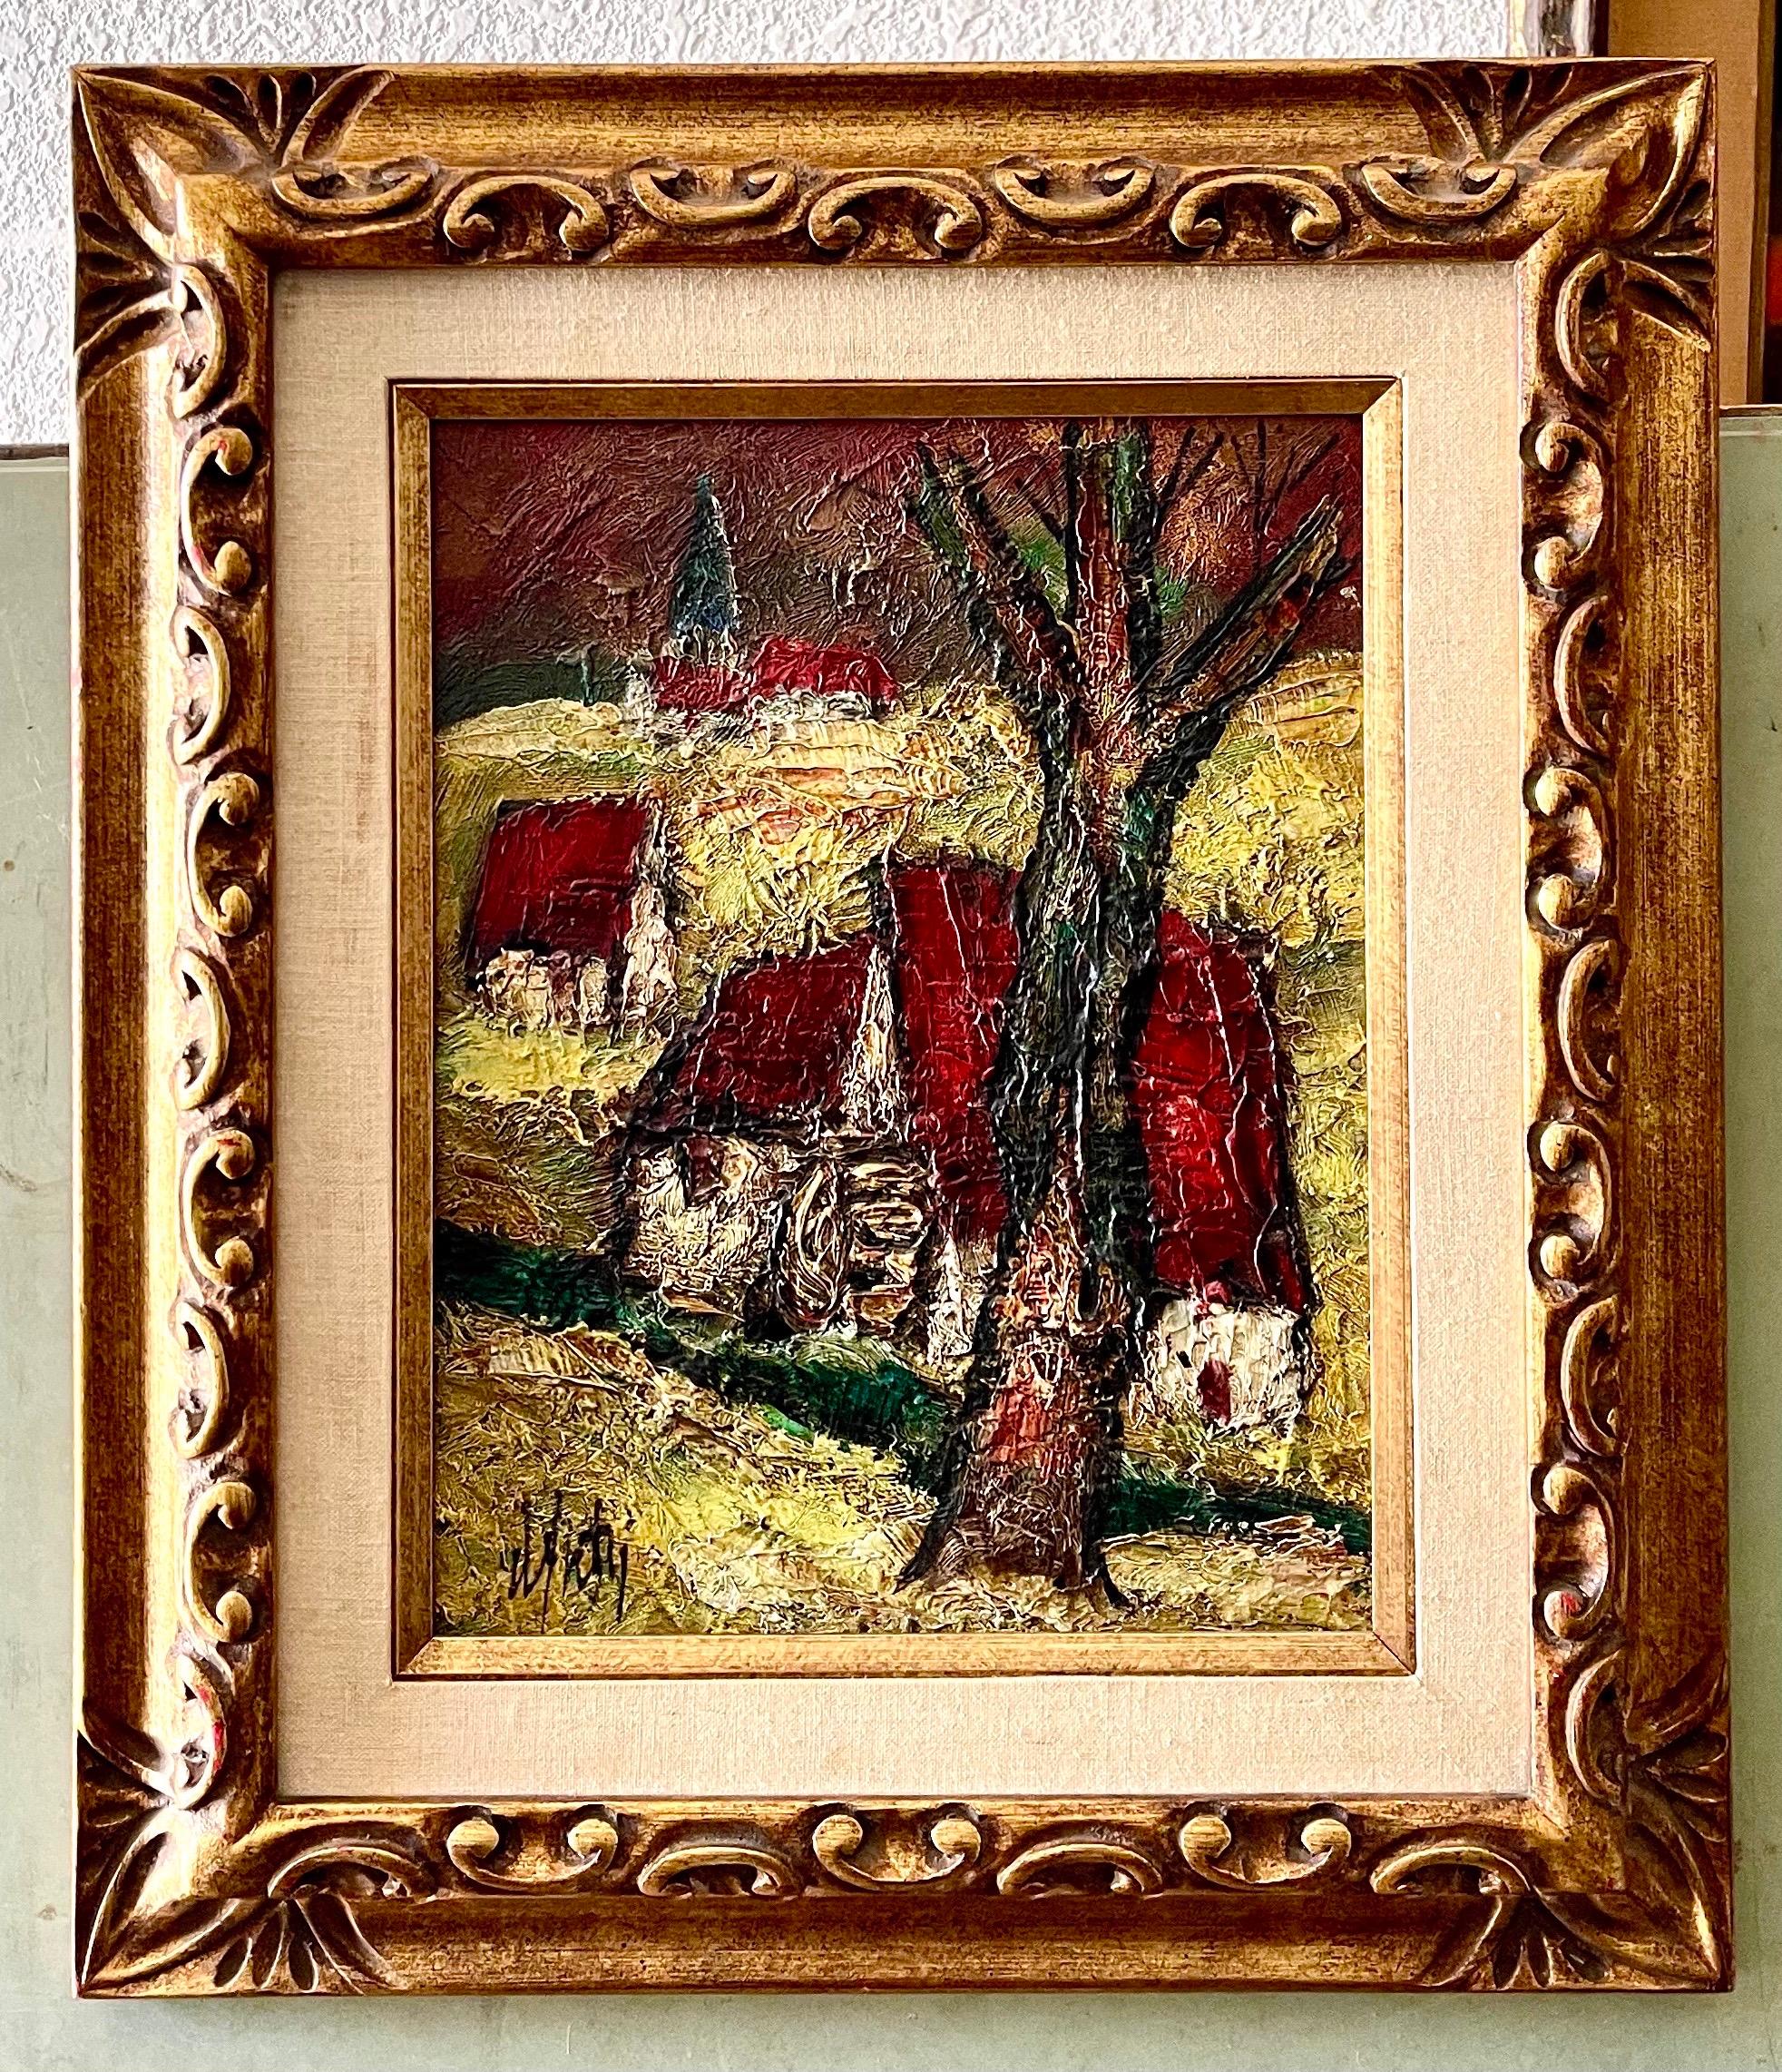 Framed 21 X 18  canvas 13 X 10

Henri Maurice D'Anty, listed French artist,Henry d'Anty 1910-1998
Born 1910 in Belleville France. Died in December 4 1998.
Educated at the Académie de la Grande Chaumière and the Académie Julian Paris. Painter of the